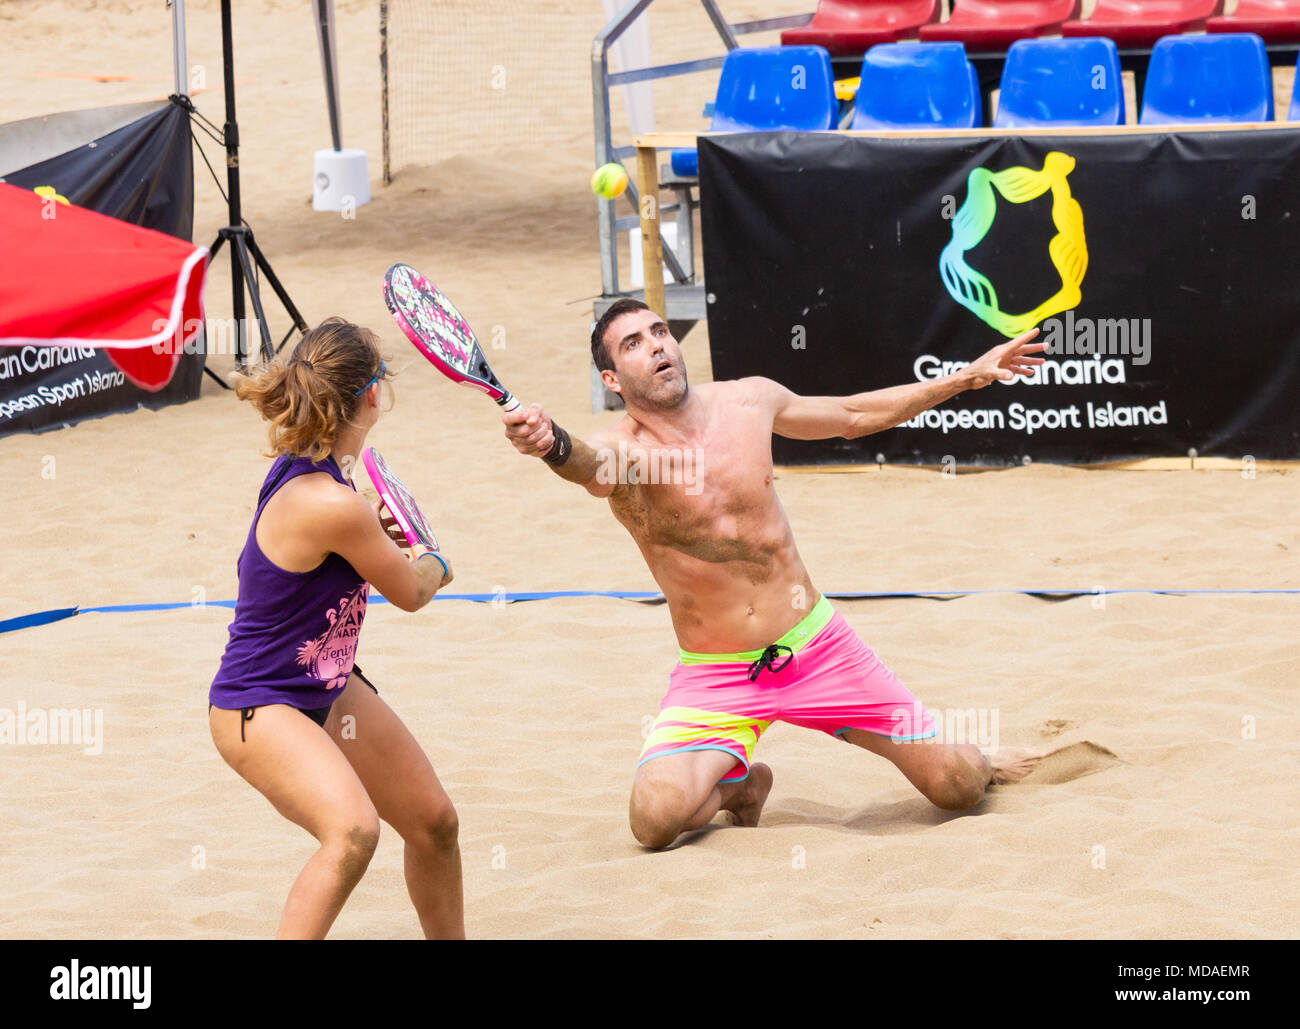 Las Palmas, Gran Canaria, Canary Islands, Spain. 19th April, 2018. With  15,000 Euros prize money at stake, the world`s top ranked beach tennis  players gather on the city beach in Las Palmas